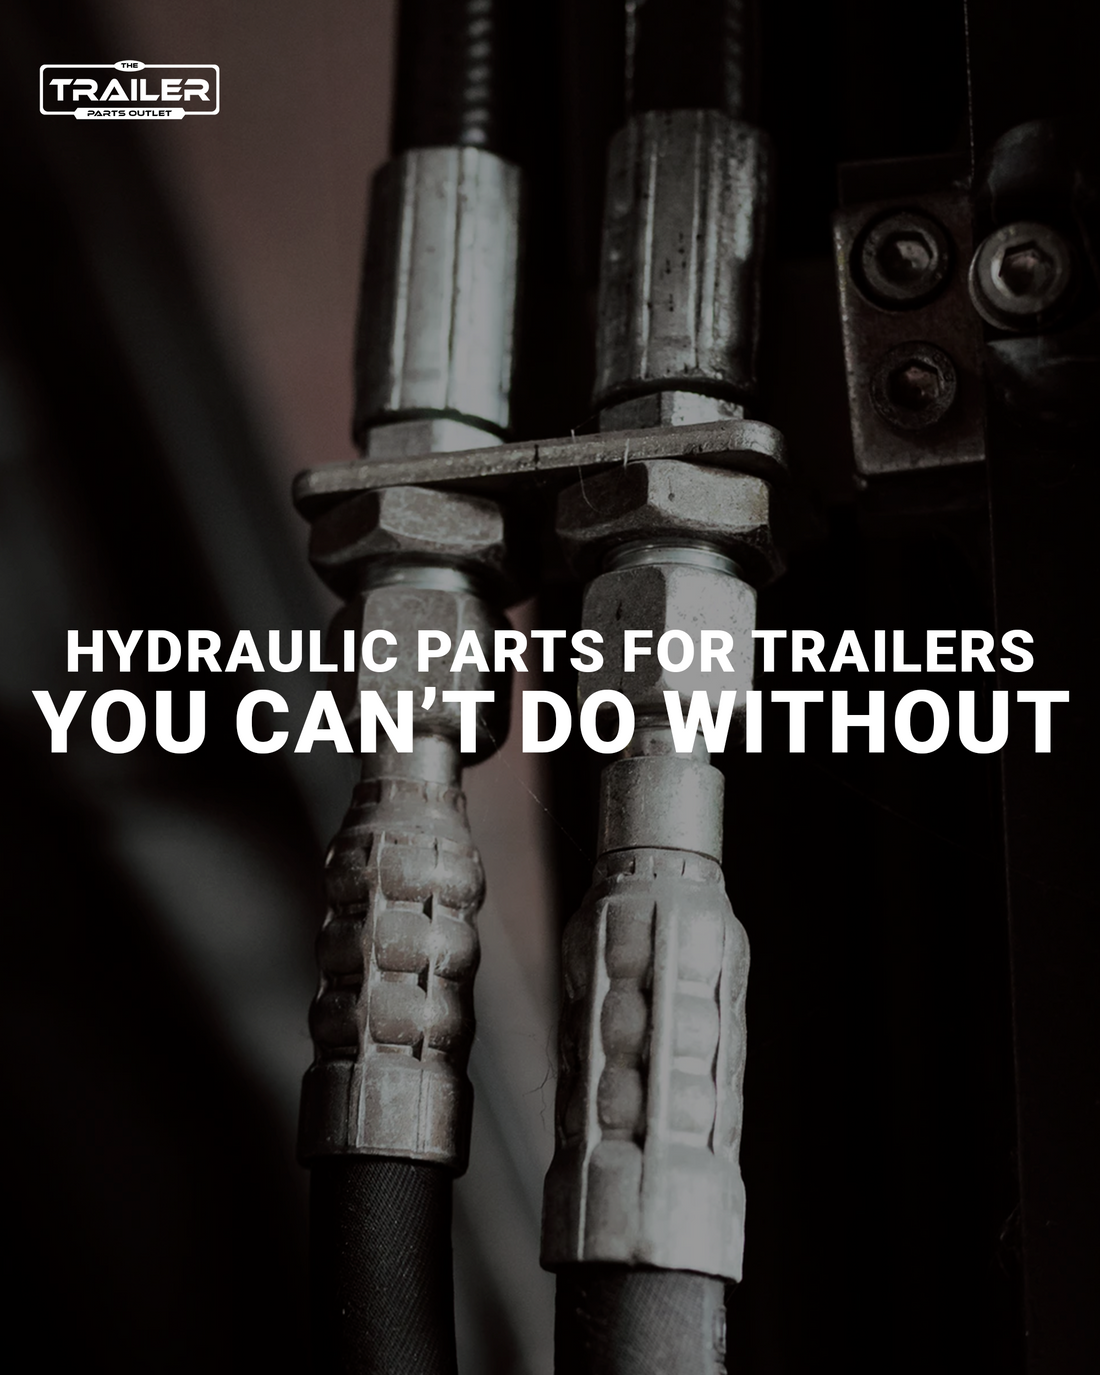 Hydraulic Parts for Trailers You Can't Do Without